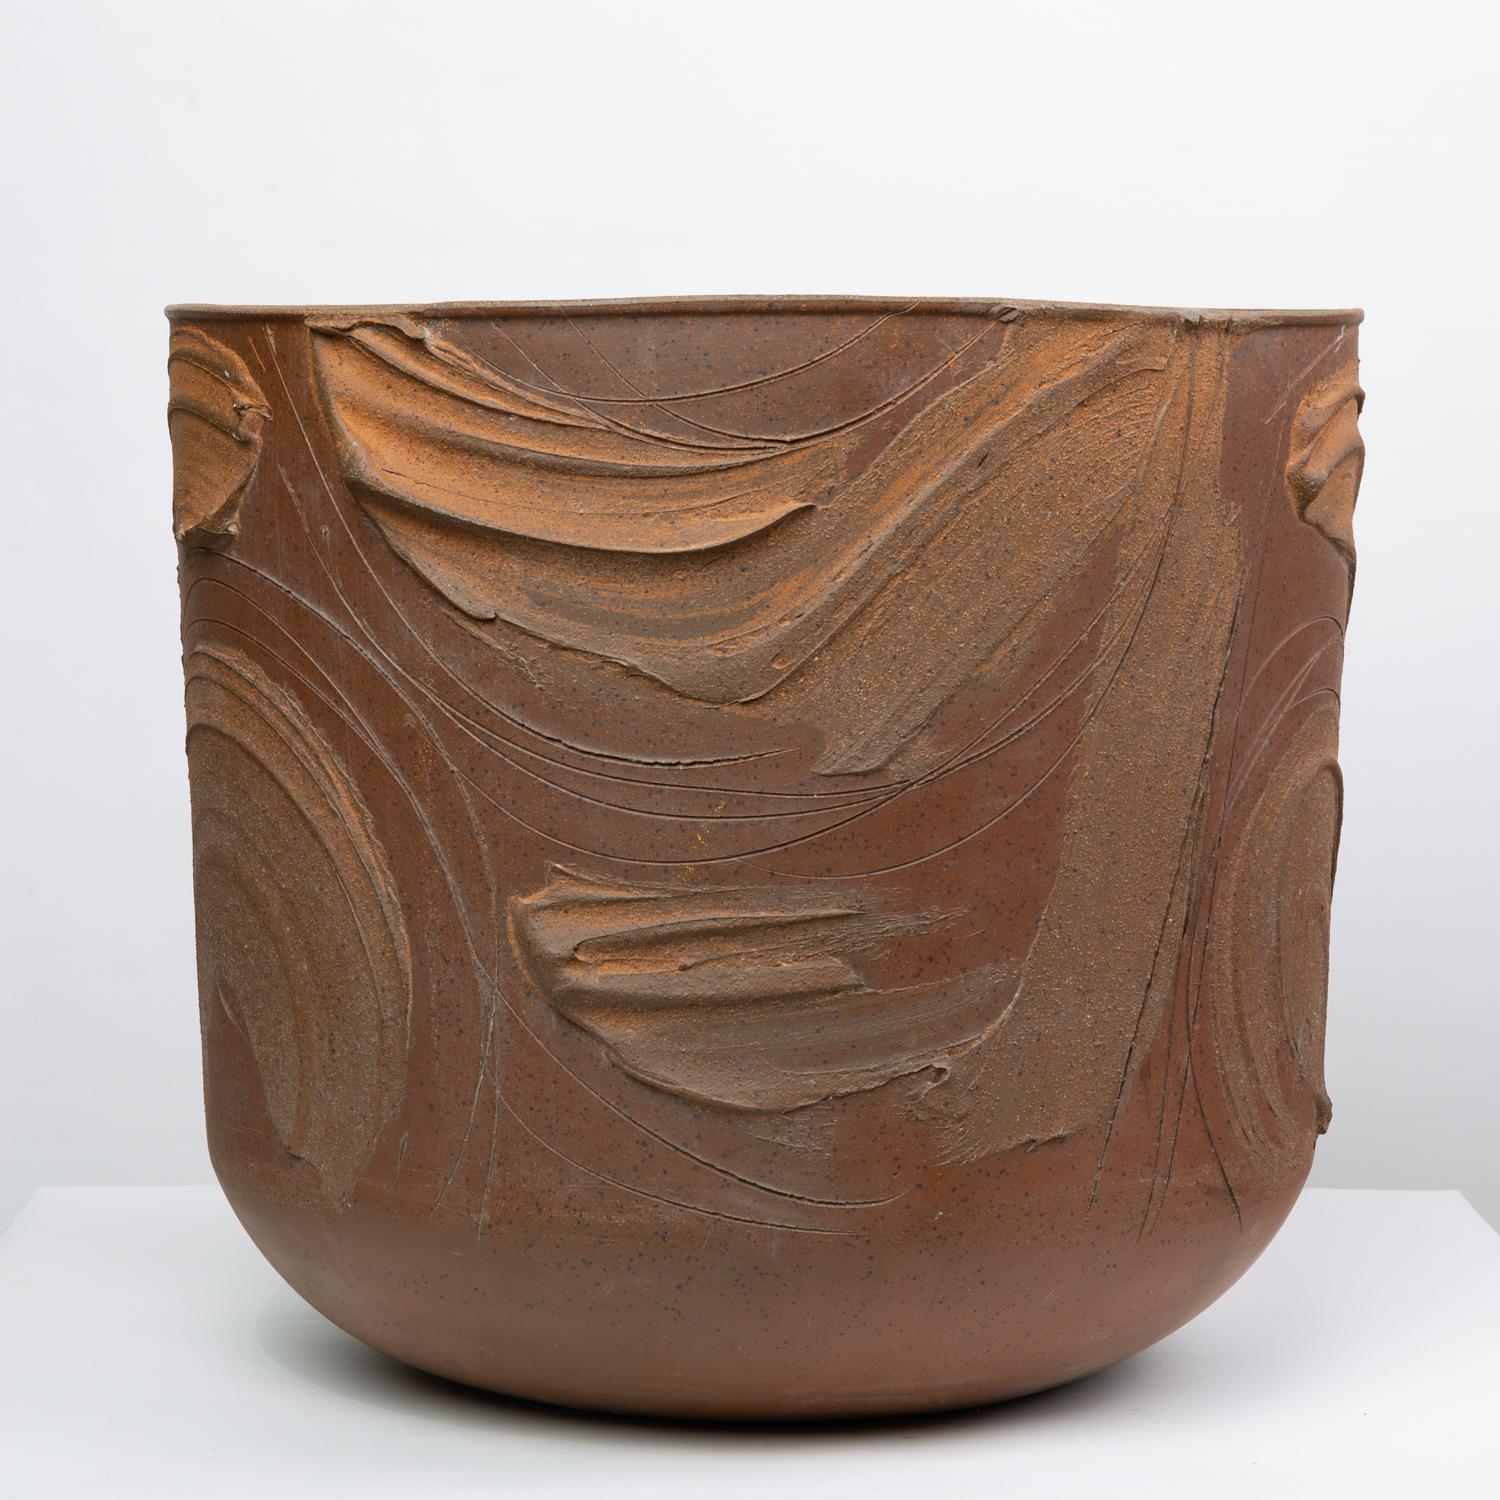 American Pro/Artisan “Expressive” Planter by David Cressey for Architectural Pottery